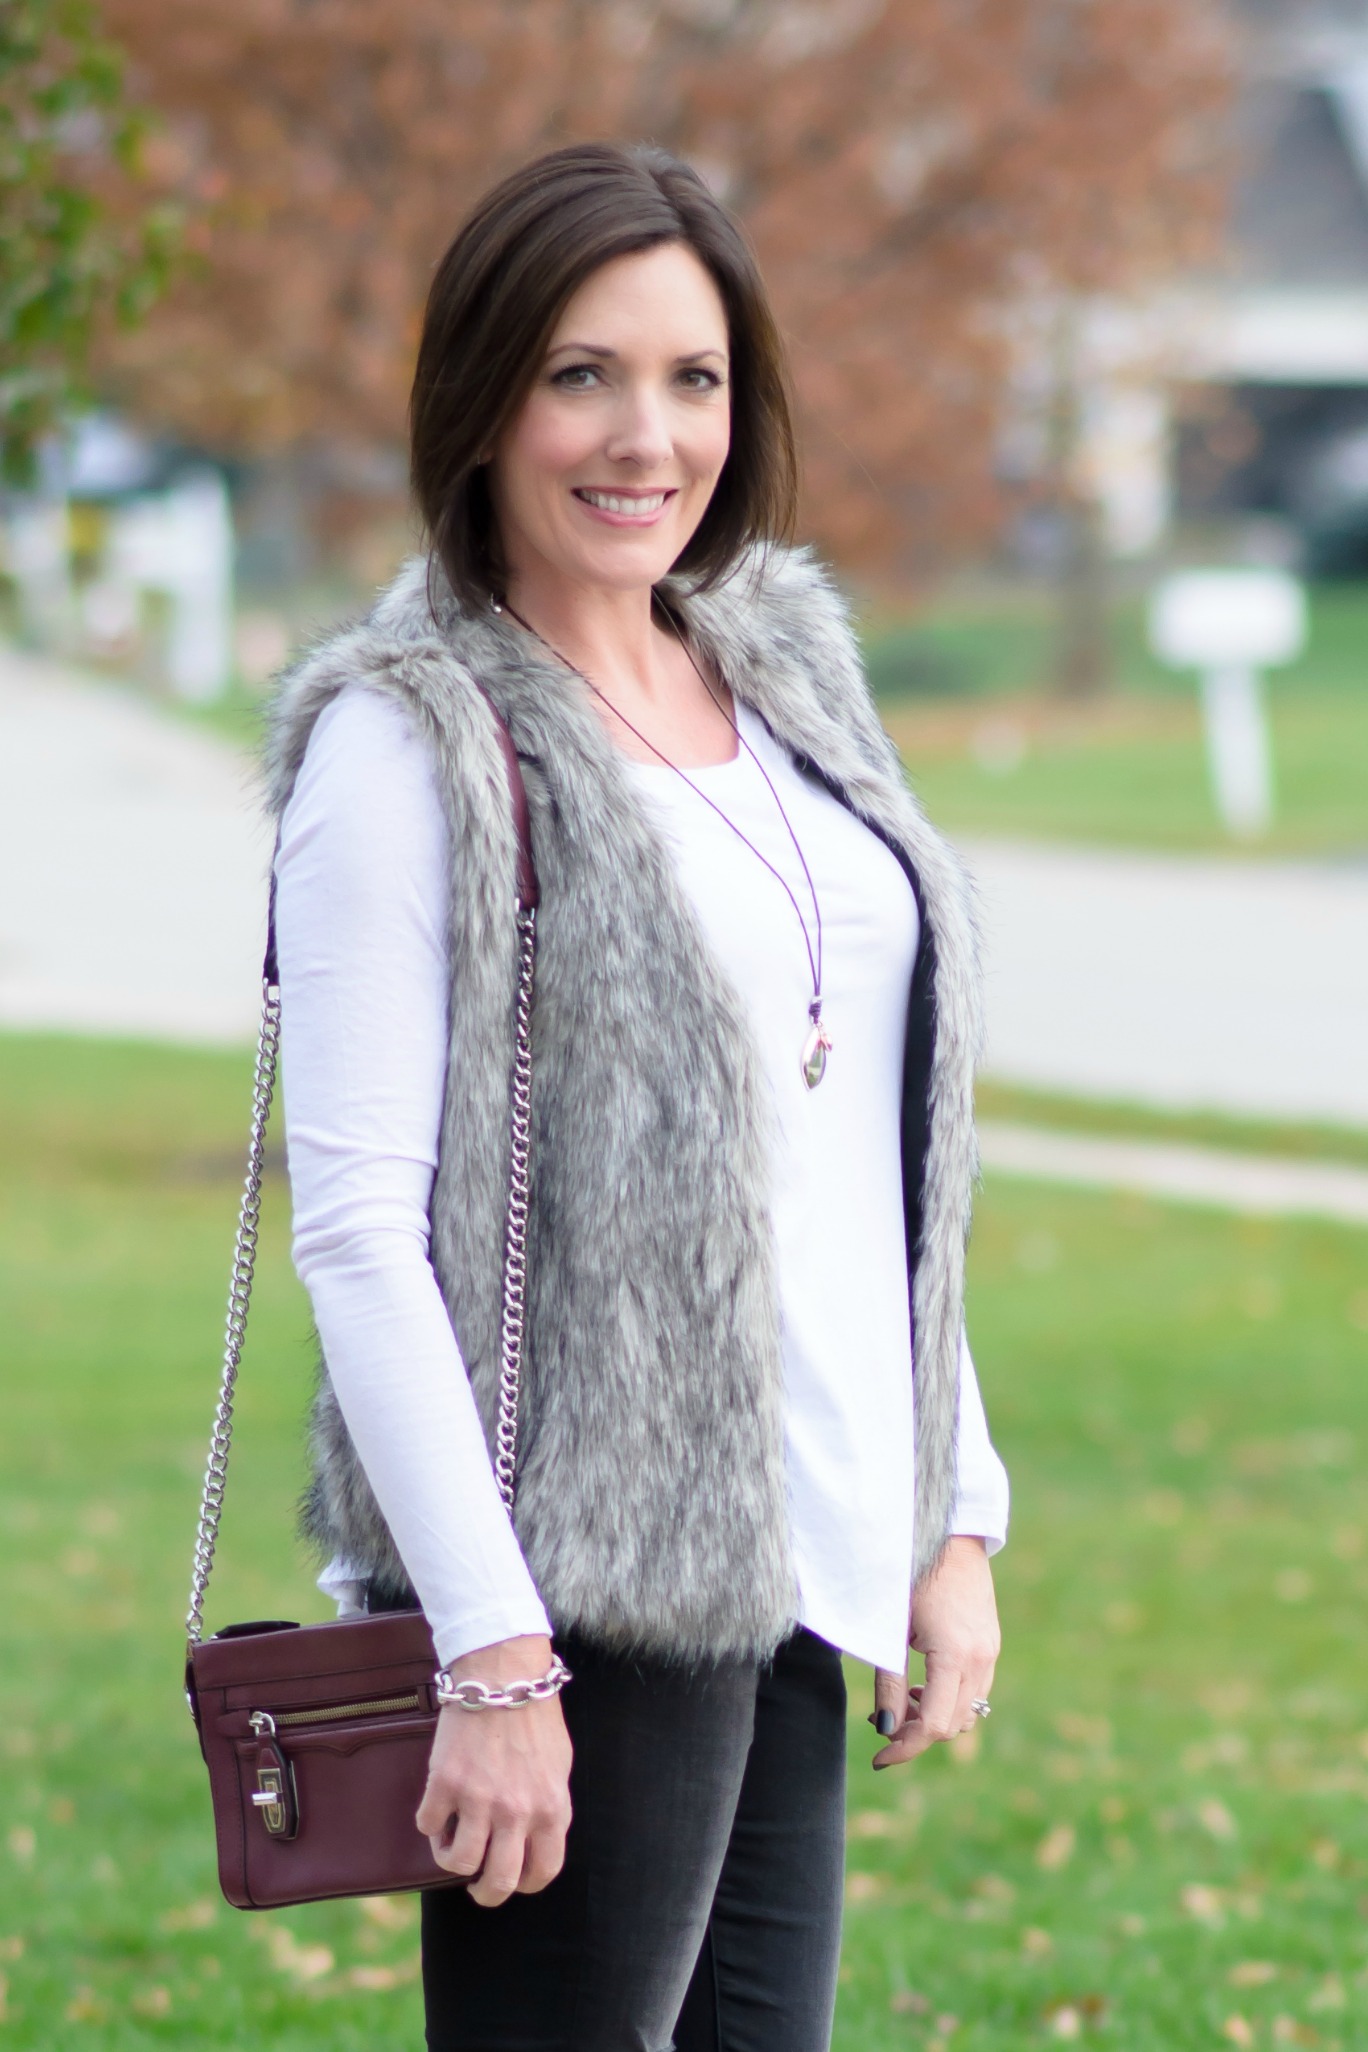 Winter Outfit Ideas: Fur Vest with Distressed Jeans and Long Sleeve Tee